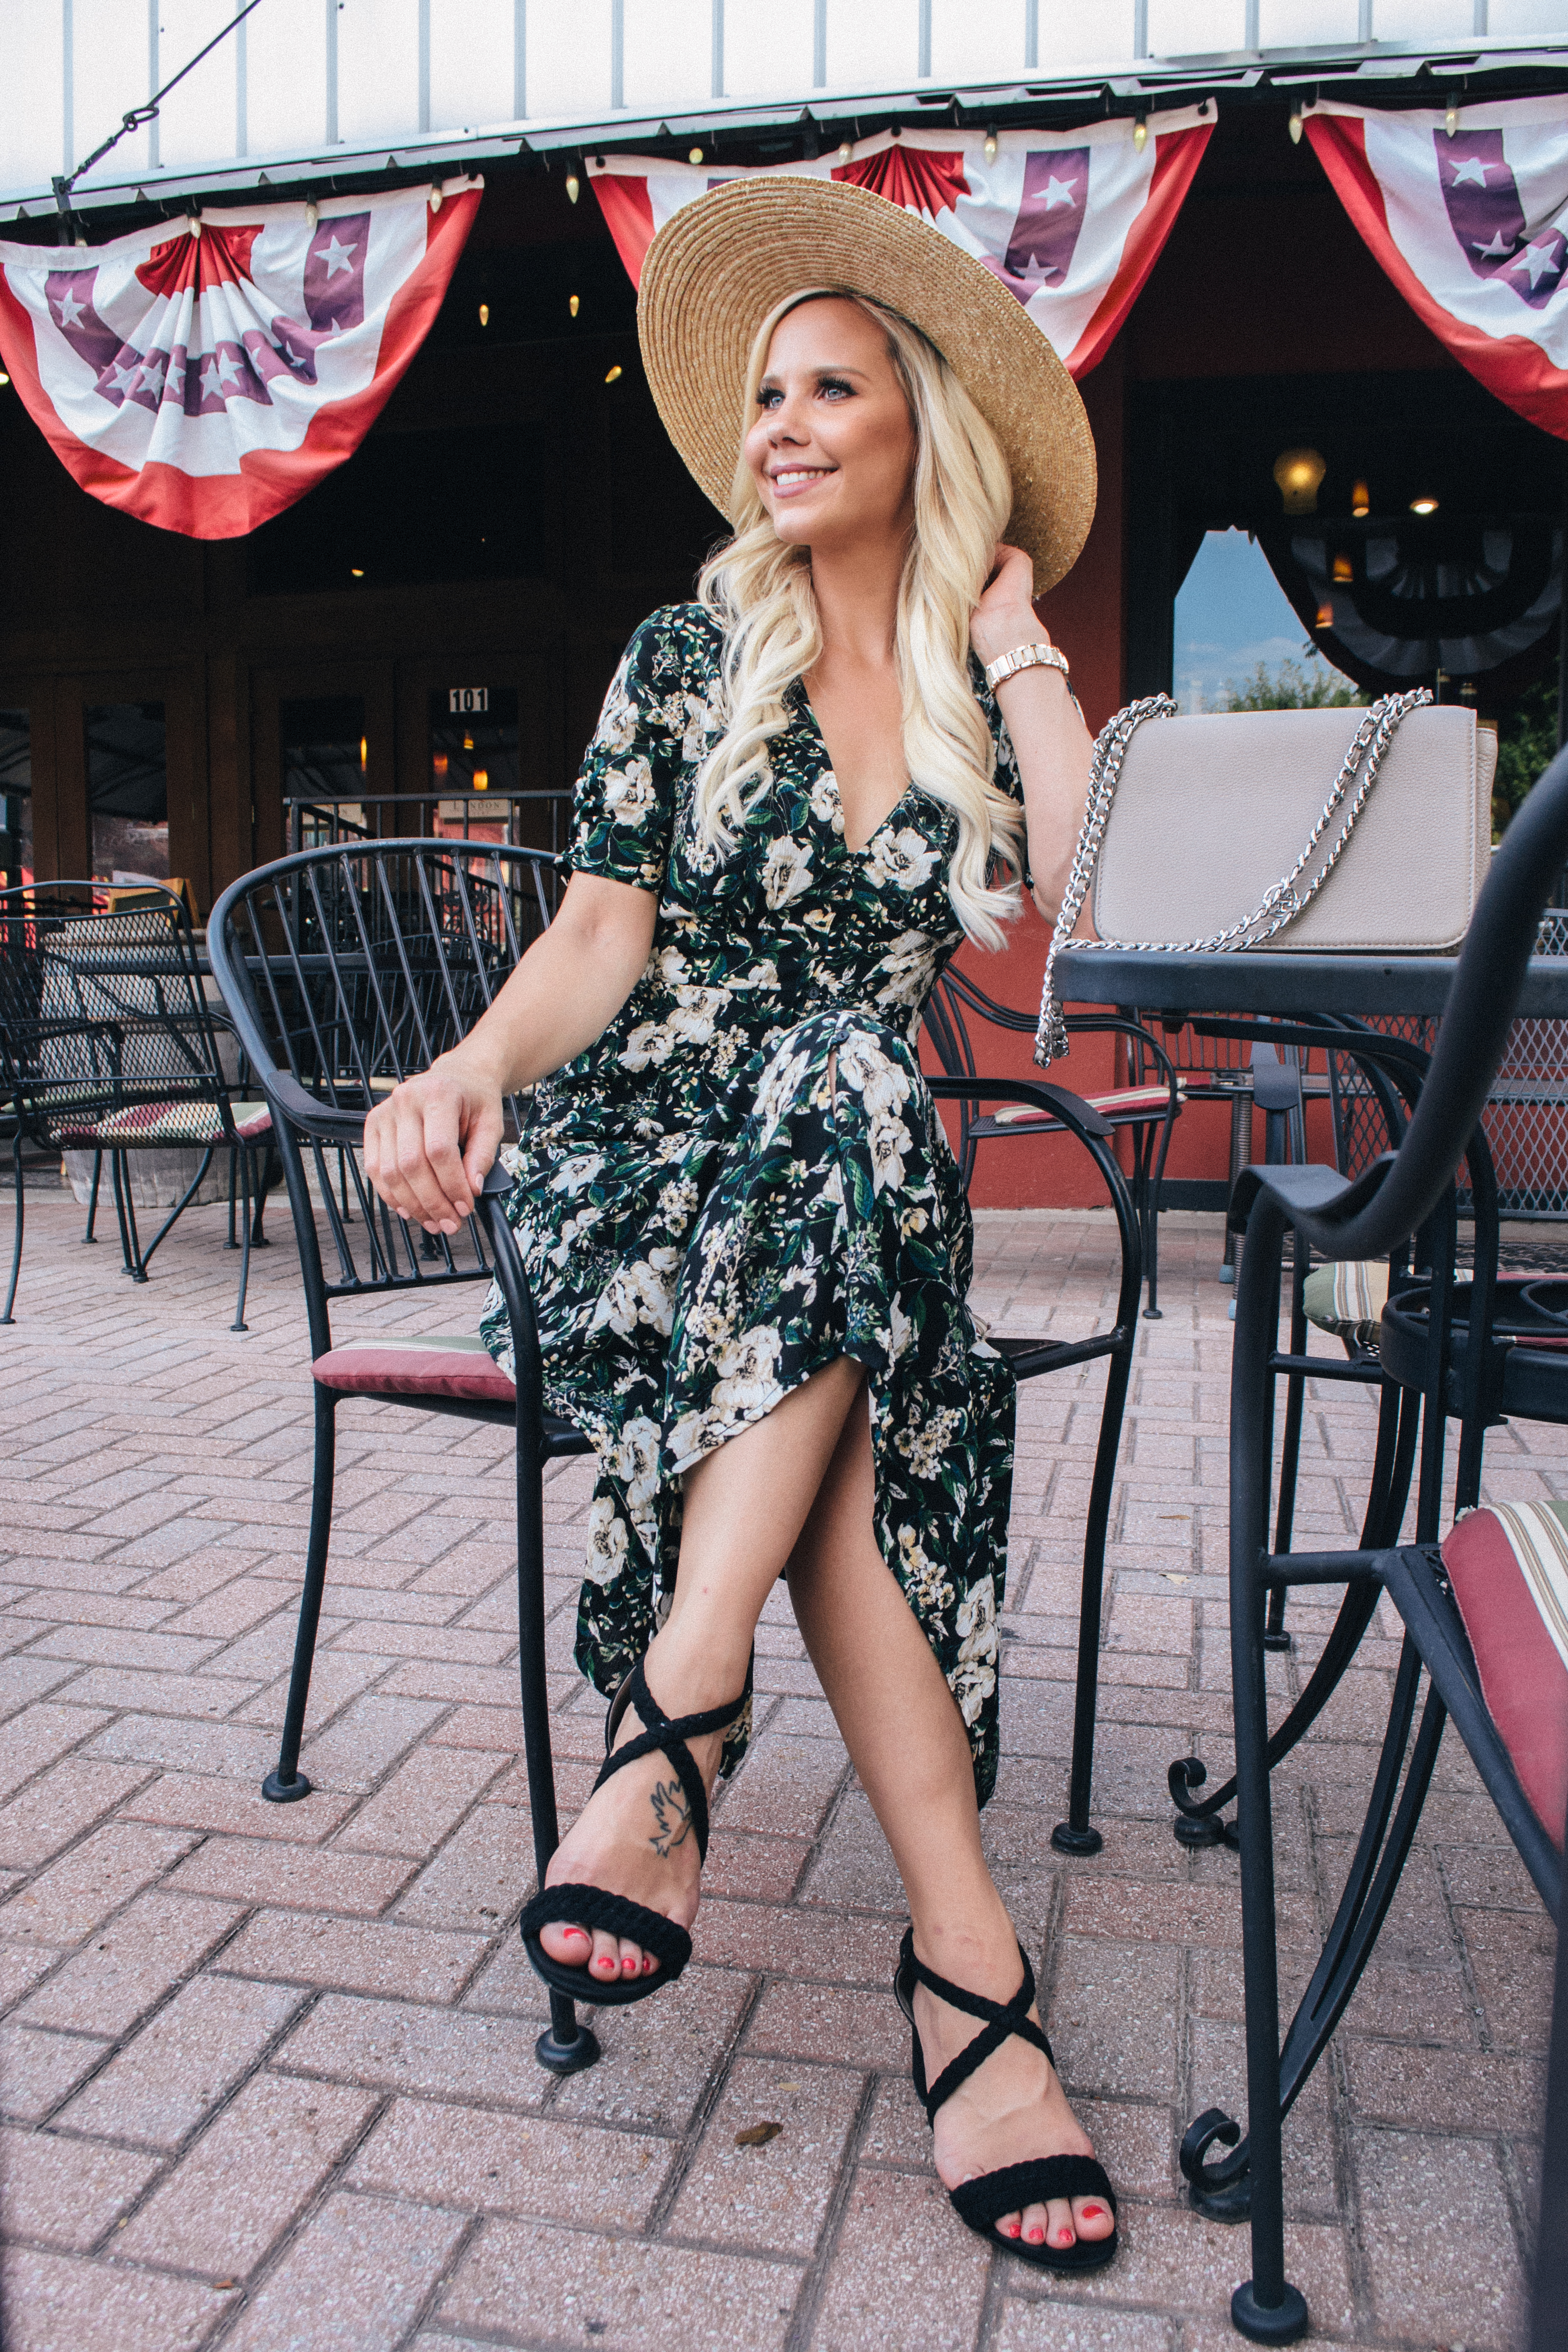 Get your wardrobe ready for fall with this perfect fall transition outfit with this ASTR green floral dress from the Nordstrom Anniversary Sale. #dallasblogger #fashion #fallfashion